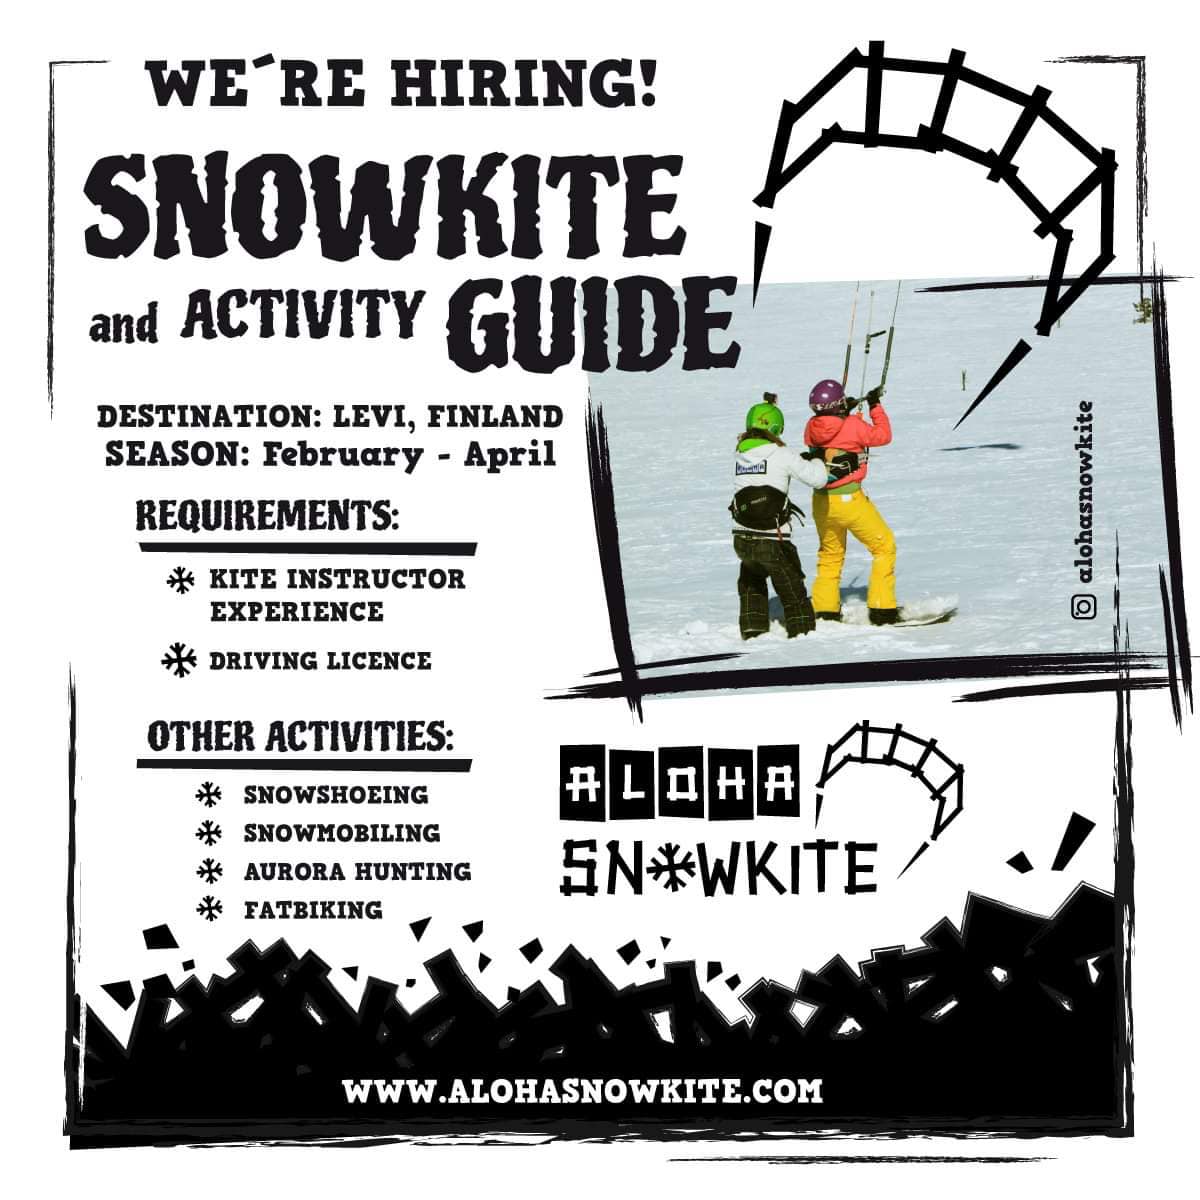 Aloha is looking for a snowkite and activity guide. Please send us your CV.